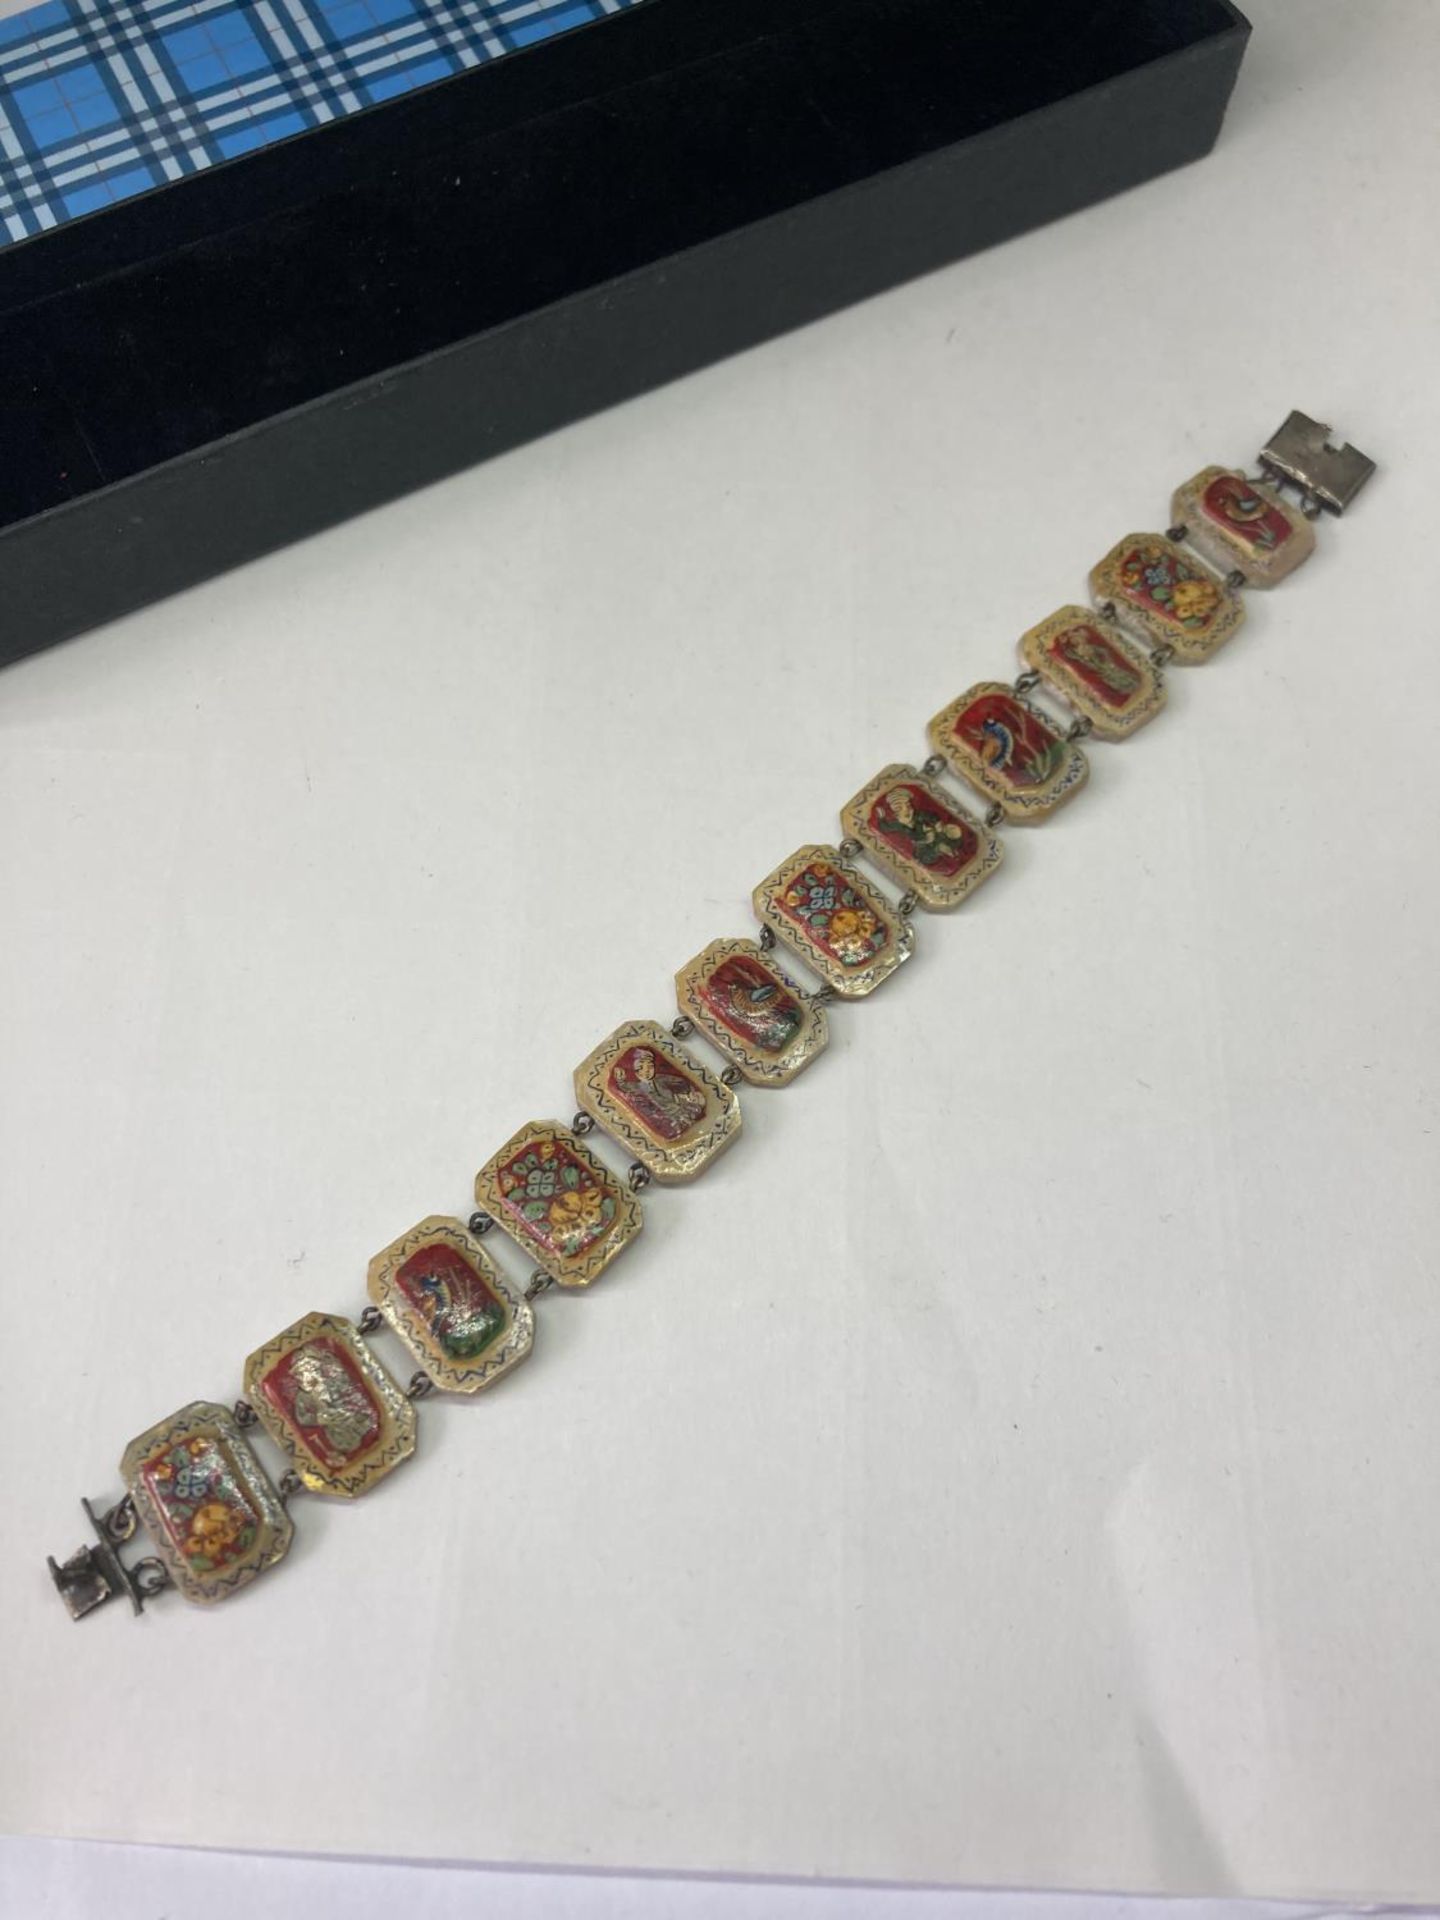 A DECORATIVE HAND PAINTED PERSIAN MOTHER OF PEARL BRACELET IN A PRESENTATION BOX - Image 3 of 12